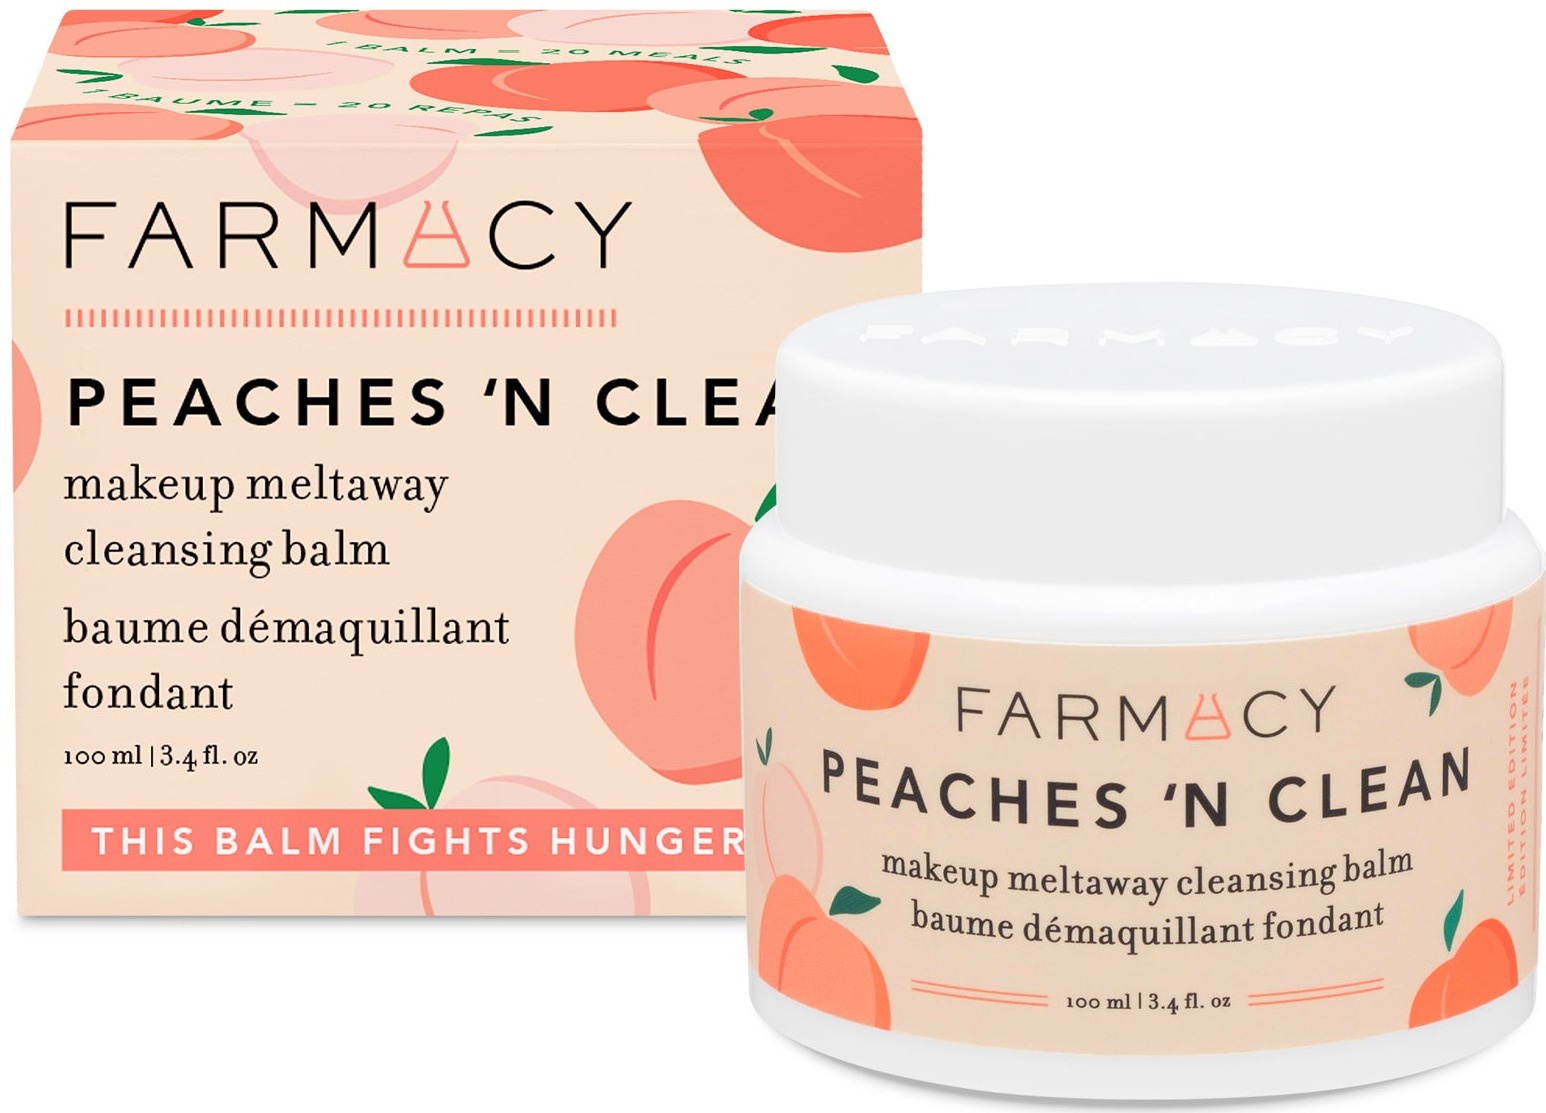 Farmacy Peaches ‘n Clean Make Up Meltaway Cleansing Balm